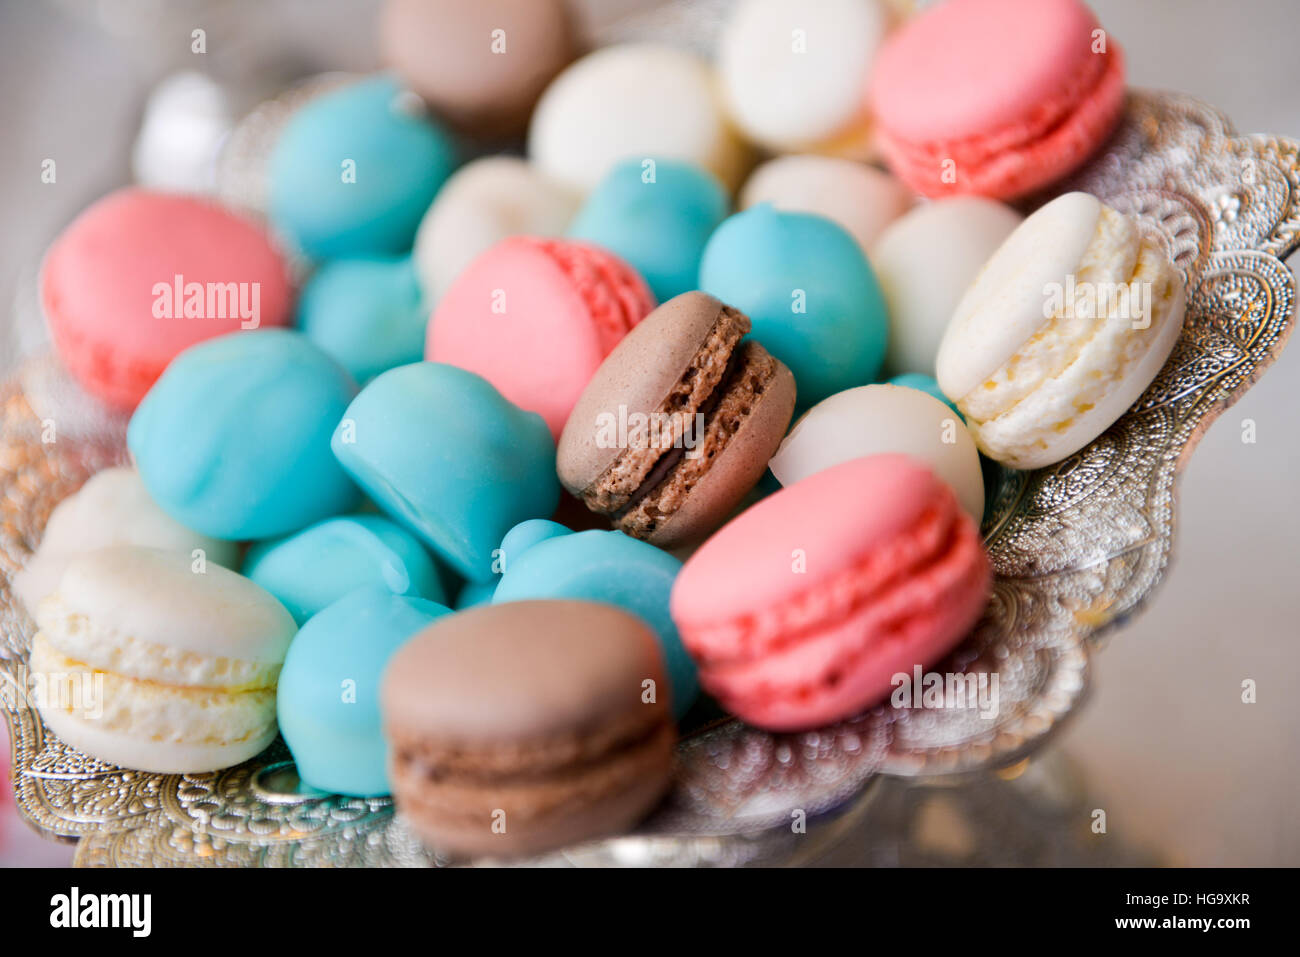 Colorful macarons on a plate on the table Stock Photo